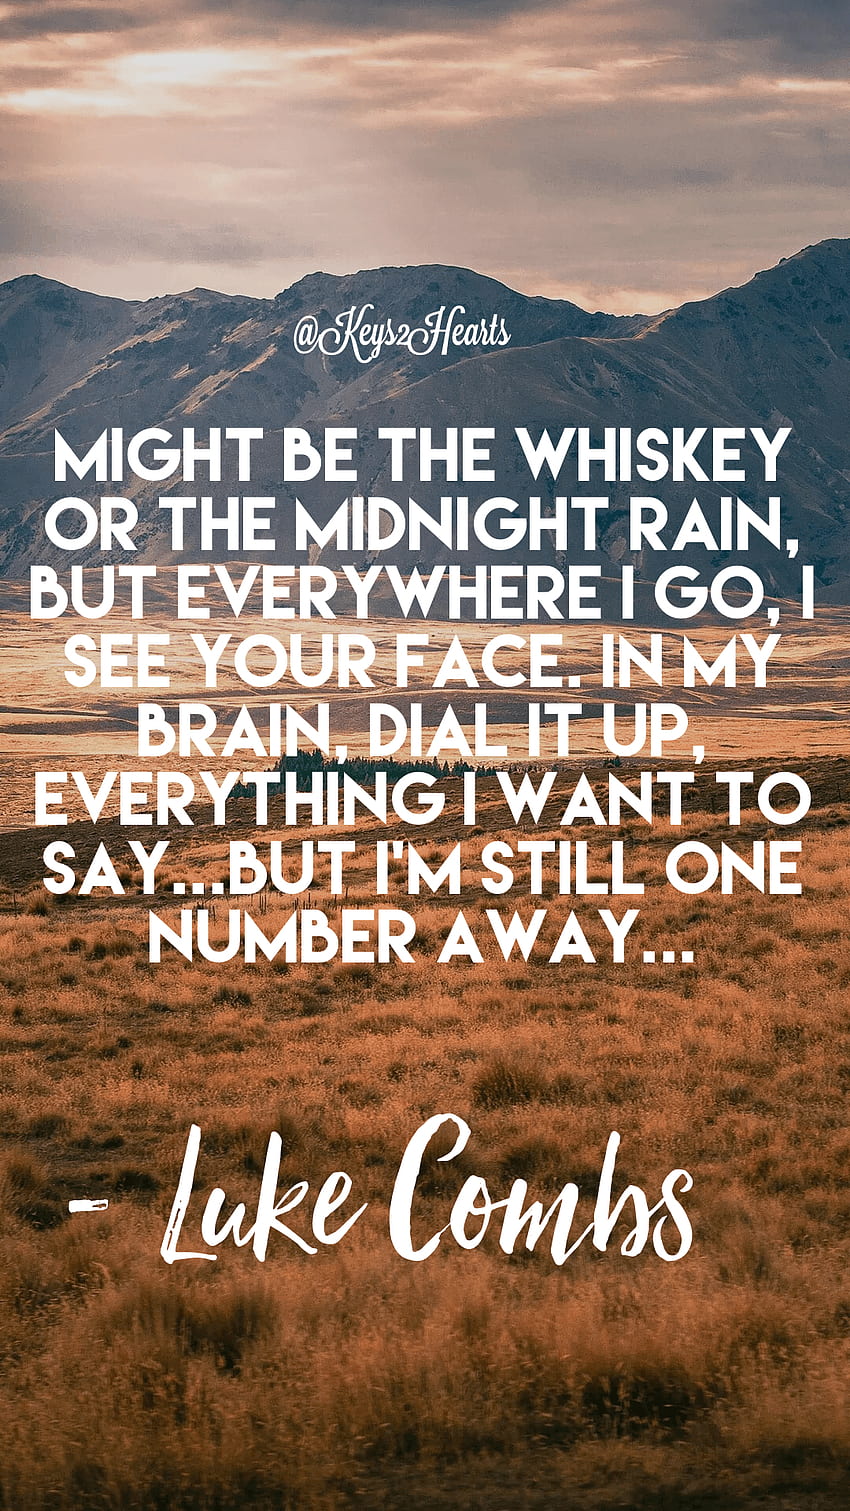 One Number Away by Luke Combs. Created by Jaison Keyette (Keys2Hearts). Country love songs, Country music lyrics quotes, Country music quotes HD phone wallpaper